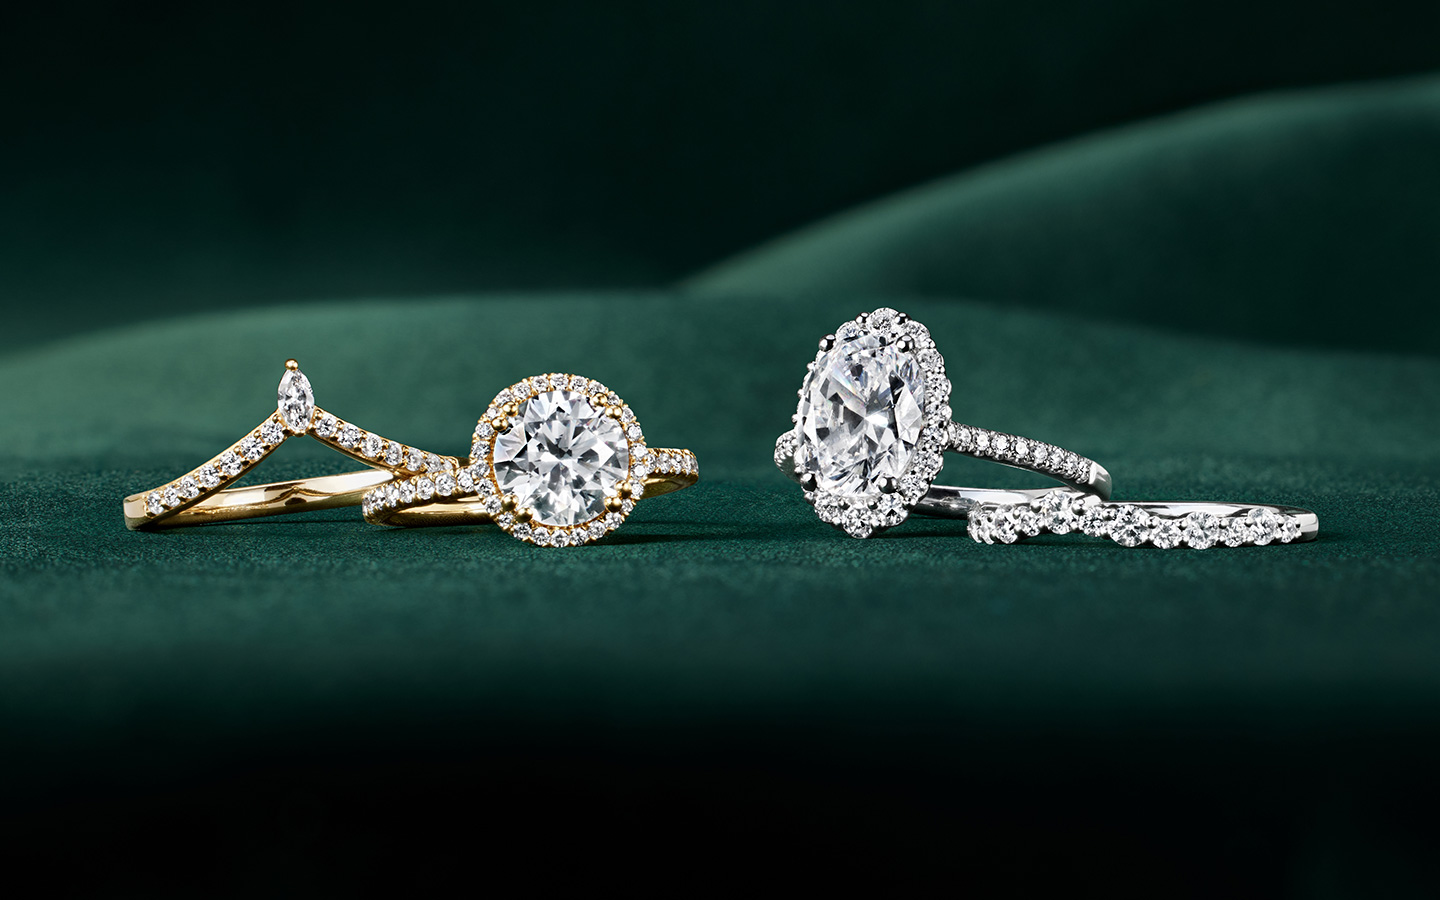 Gold and diamond engagement rings and wedding bands with oval and round diamonds.